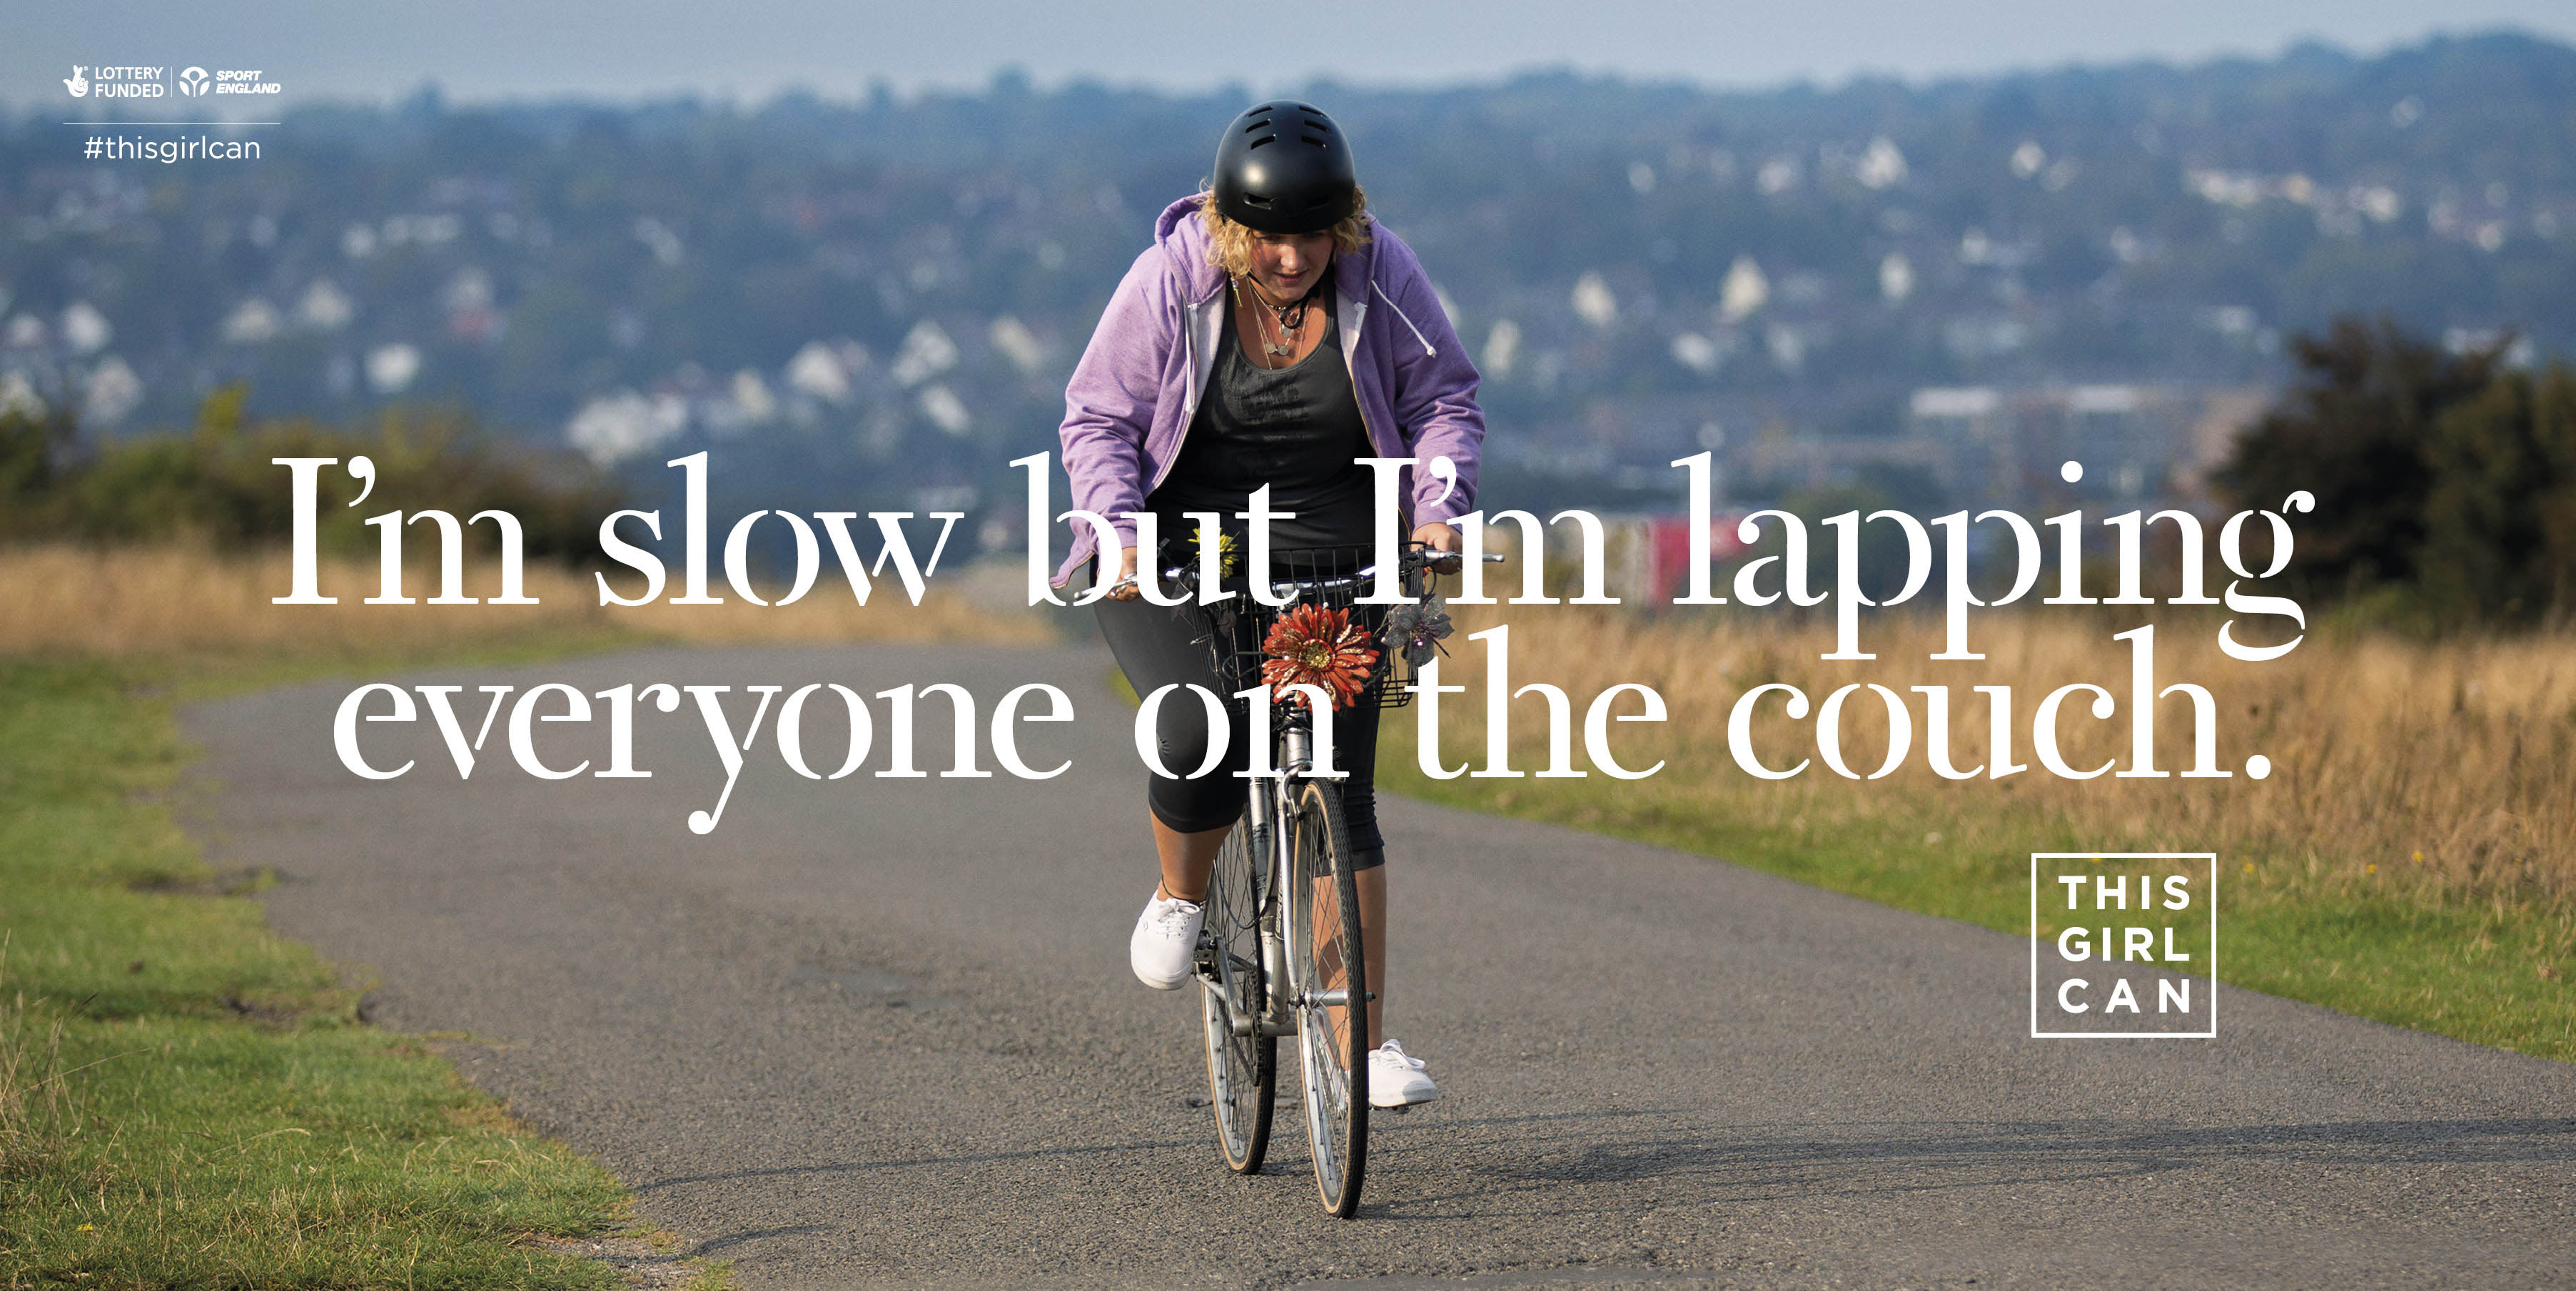 The important message of the #thisgirlcan campaign